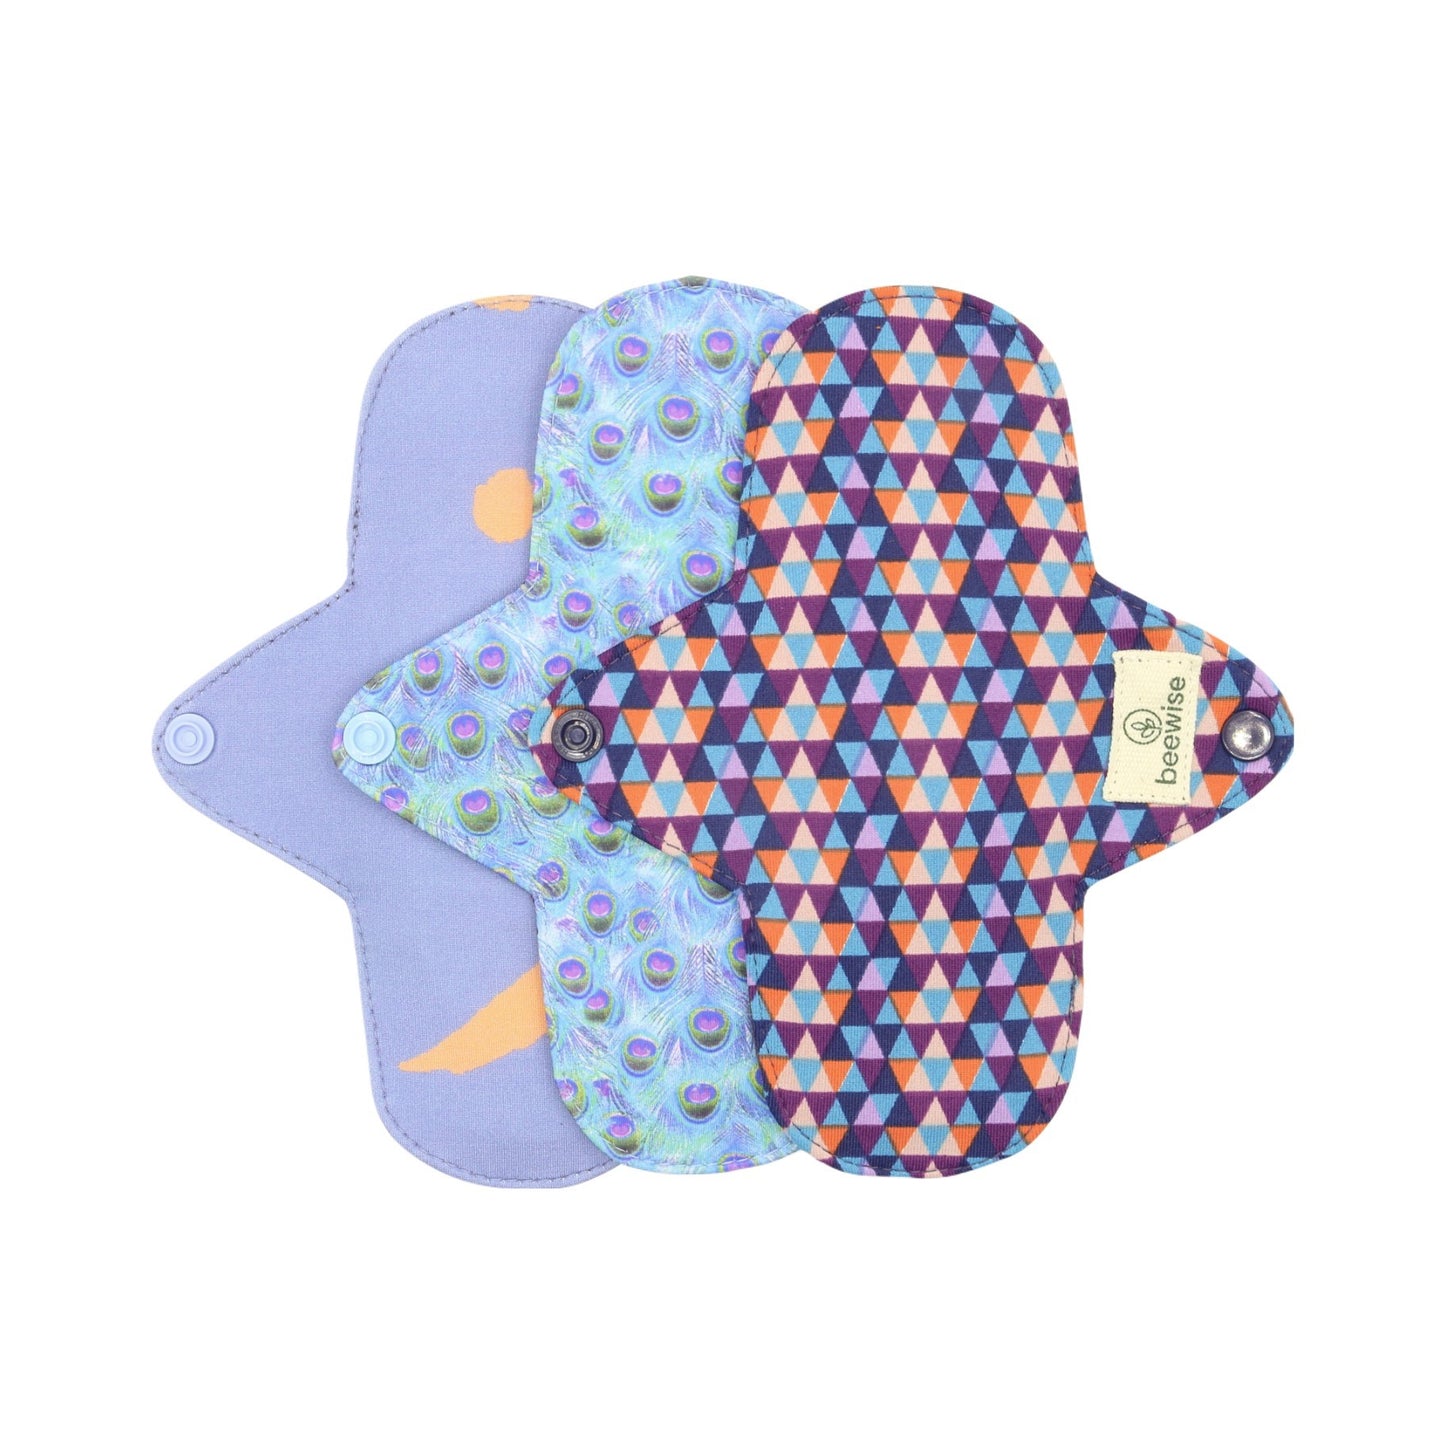 reusable menstrual pads made in brazil with cotton and a colourful pattern set of 3